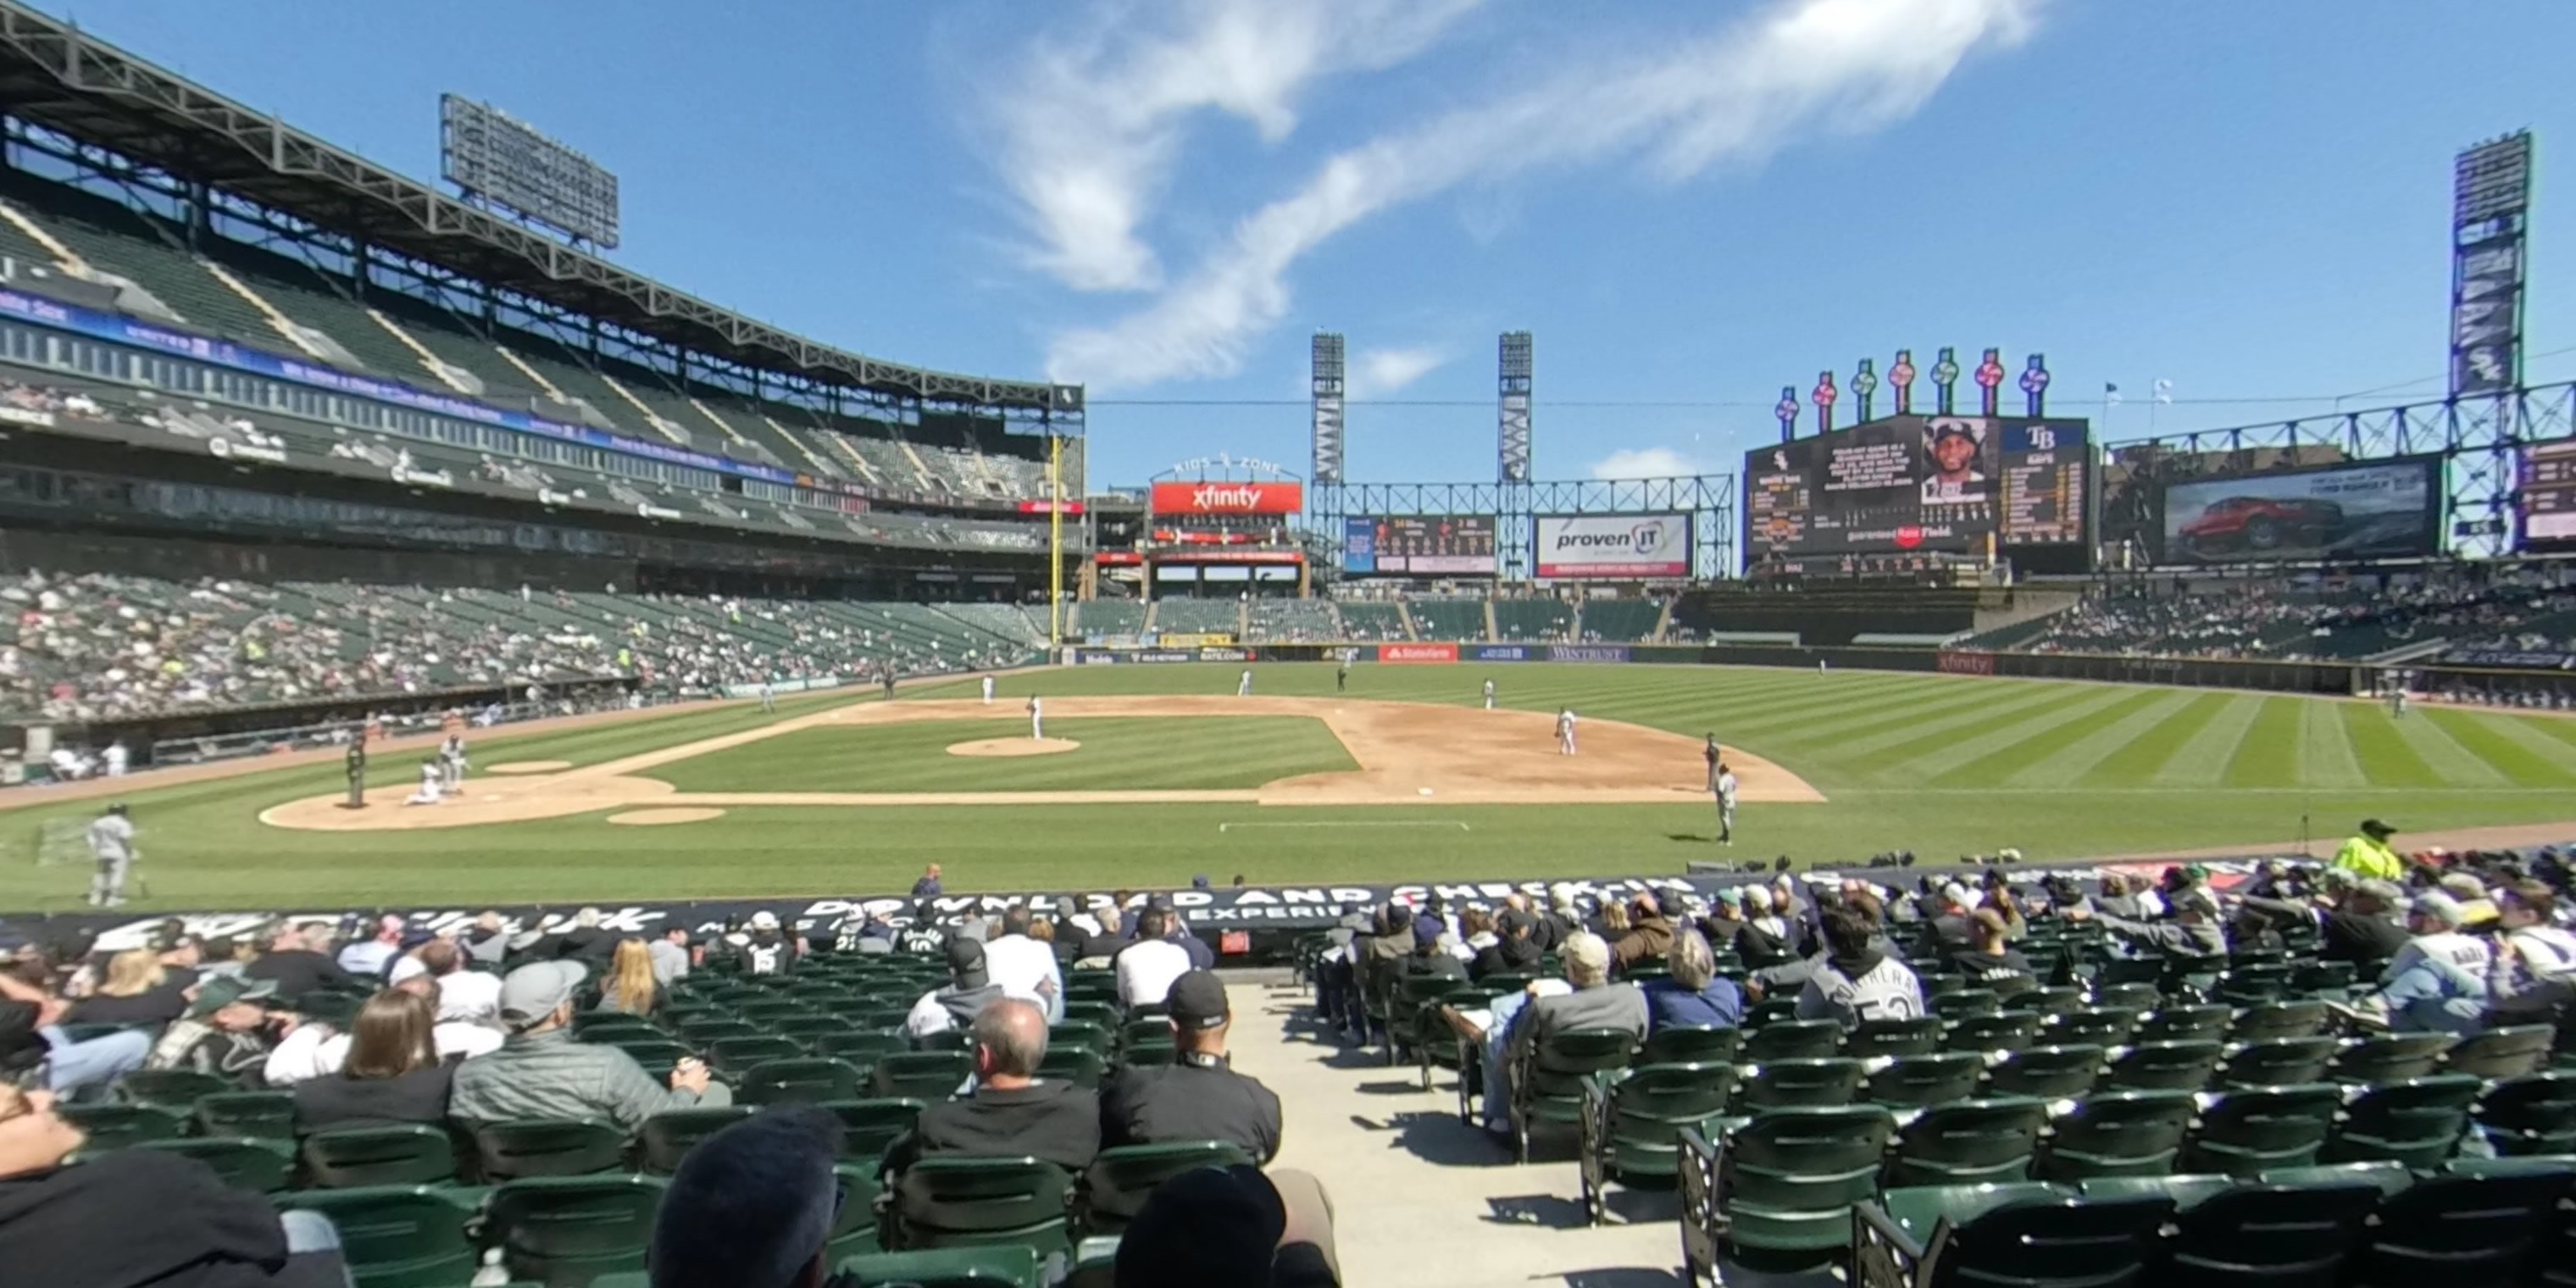 section 124 panoramic seat view  - guaranteed rate field